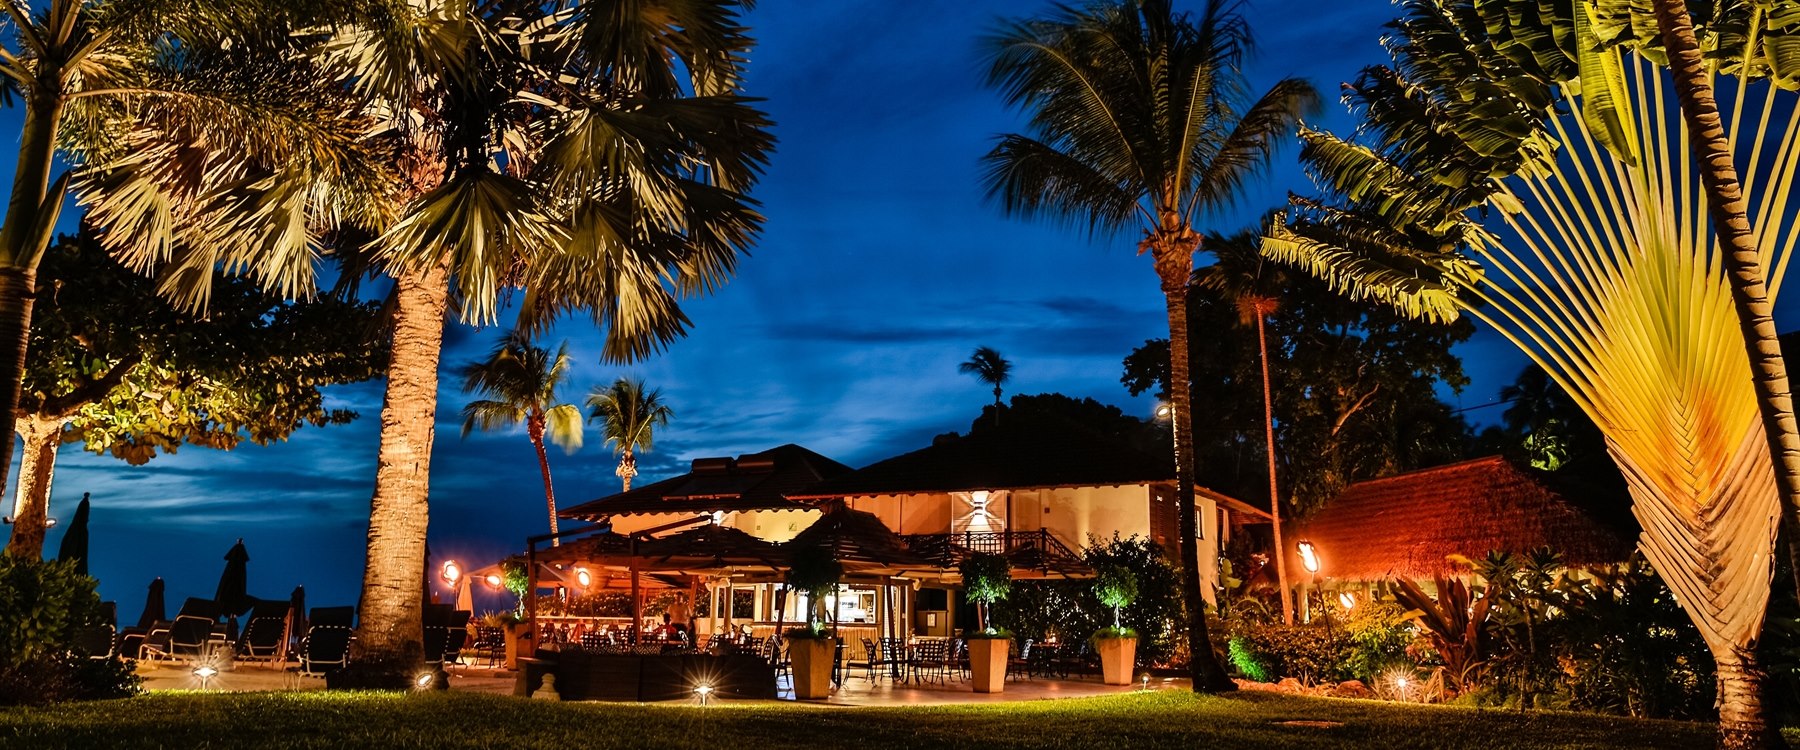 Enjoy an alfresco lunch or a cocktail as the sun goes down at Harold's Bar at The Sand Piper, Barbados